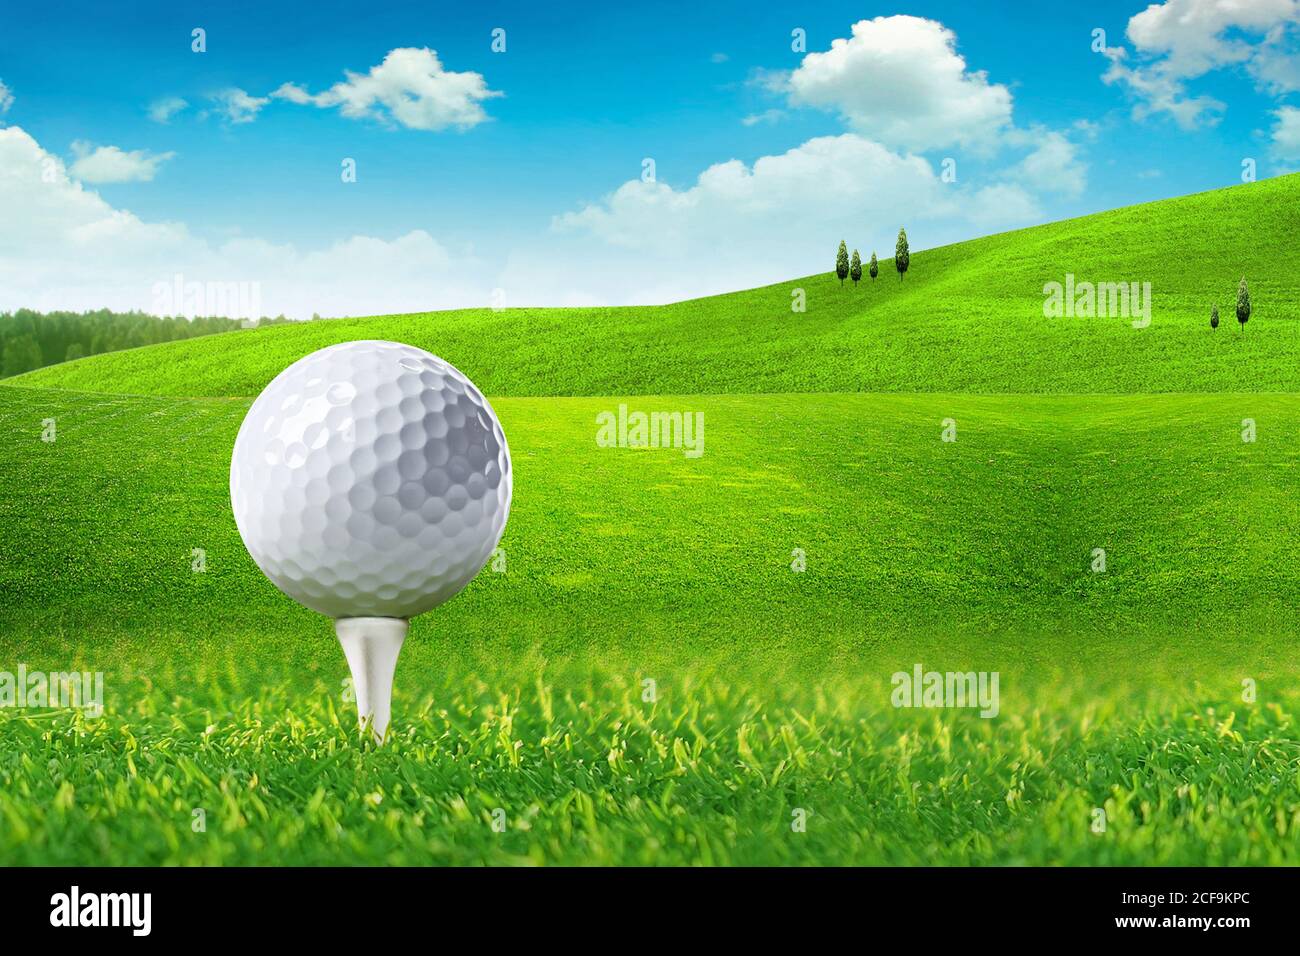 Golf ball on tee in green grass at golf course Stock Photo